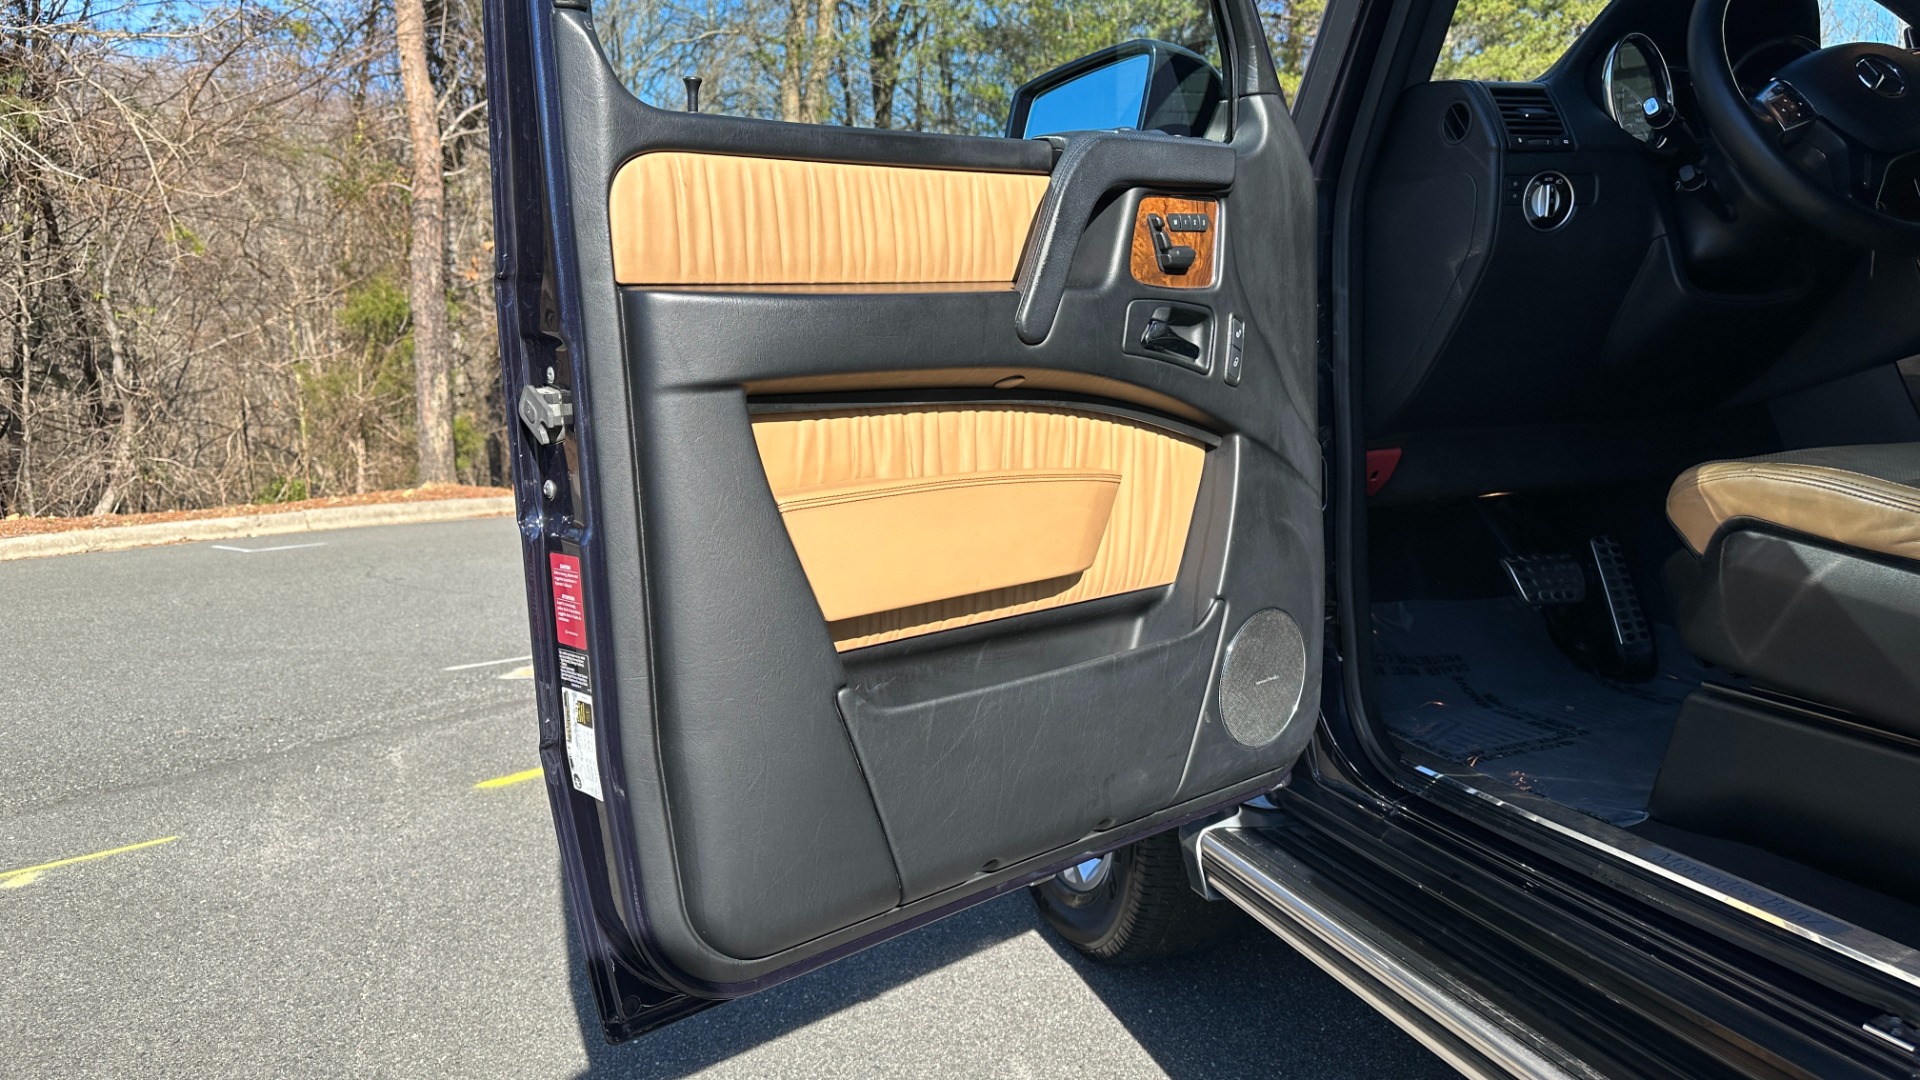 Used 2015 Mercedes-Benz G-Class G550 / DESIGNO NAPPA LEATHER / DESIGNO HEADLINER / HEATED STEERING / NAV /  for sale Sold at Formula Imports in Charlotte NC 28227 10